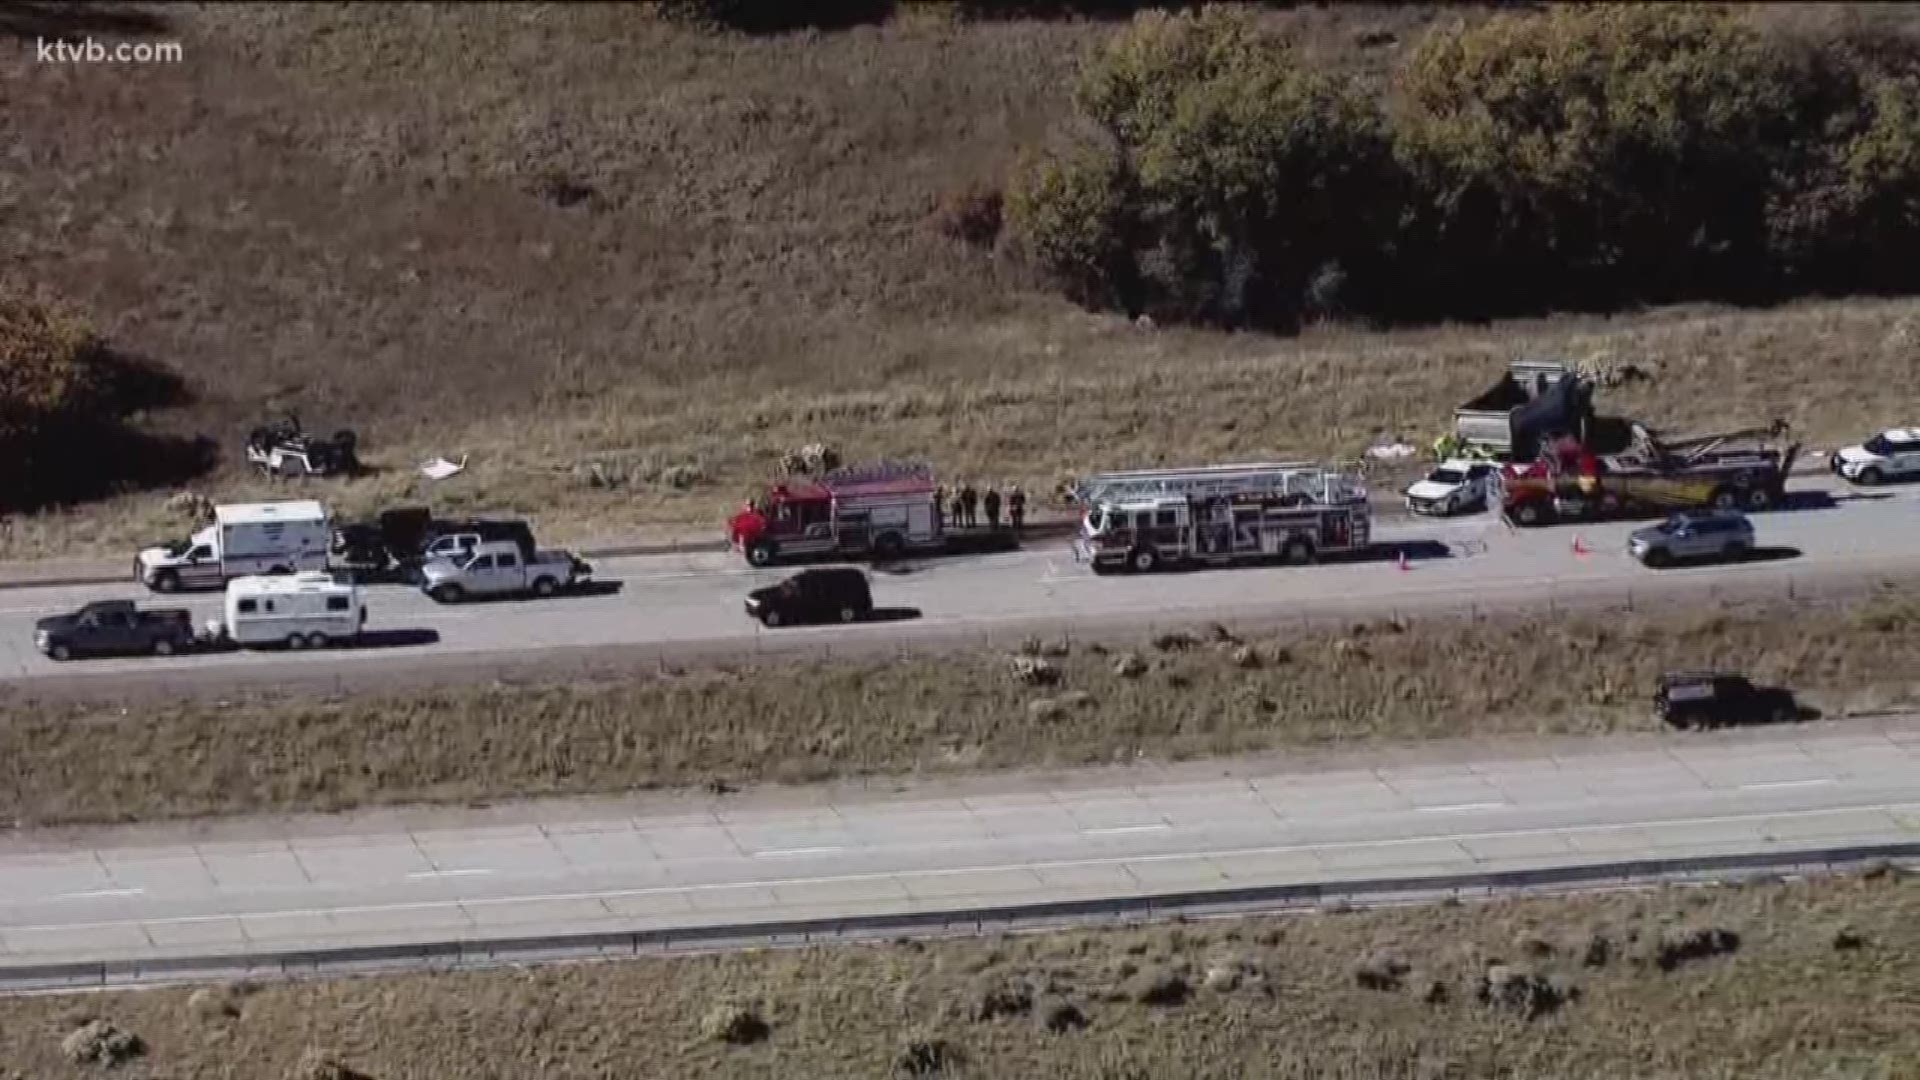 Six people died on Friday when a dump truck crossed a median and hit a pickup truck. Utah Highway Patrol officers reported finding prescription pills and open containers of alcohol inside the dump truck.